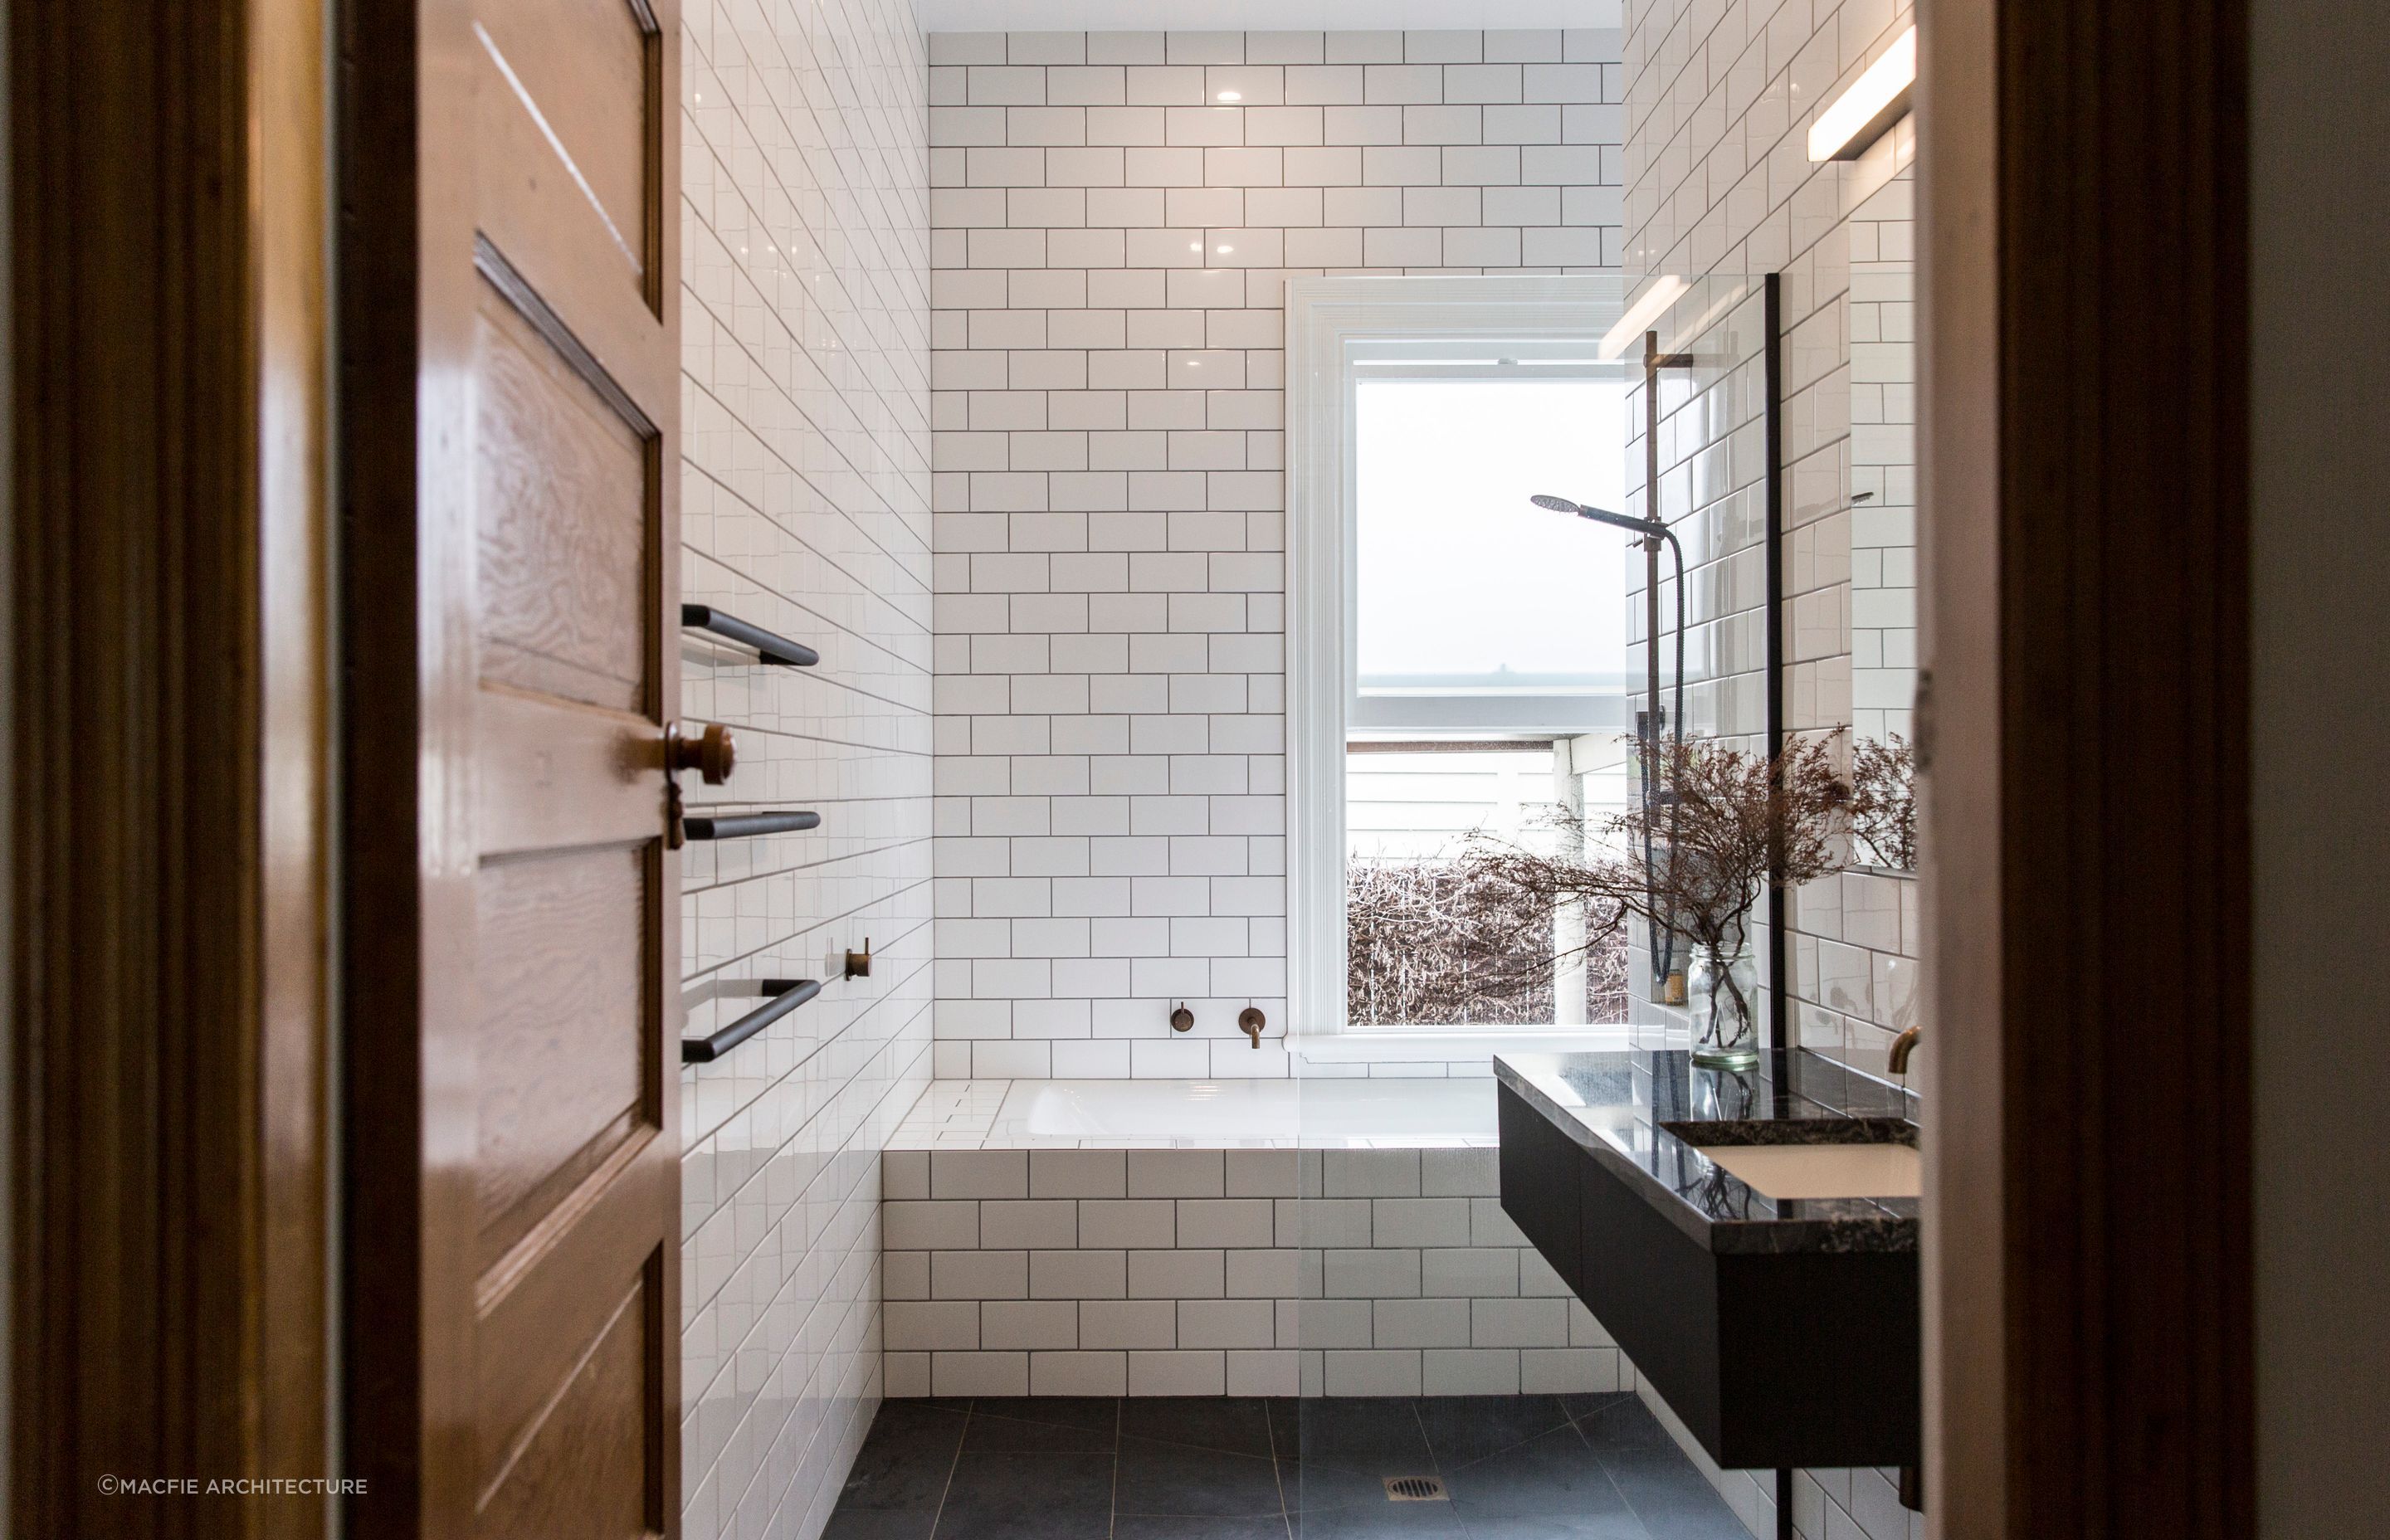 Scope, size, fittings and design all contribute to the cost of a bathroom renovation, an exquisite example of which found in this bungalow bathroom addition in Sandringham